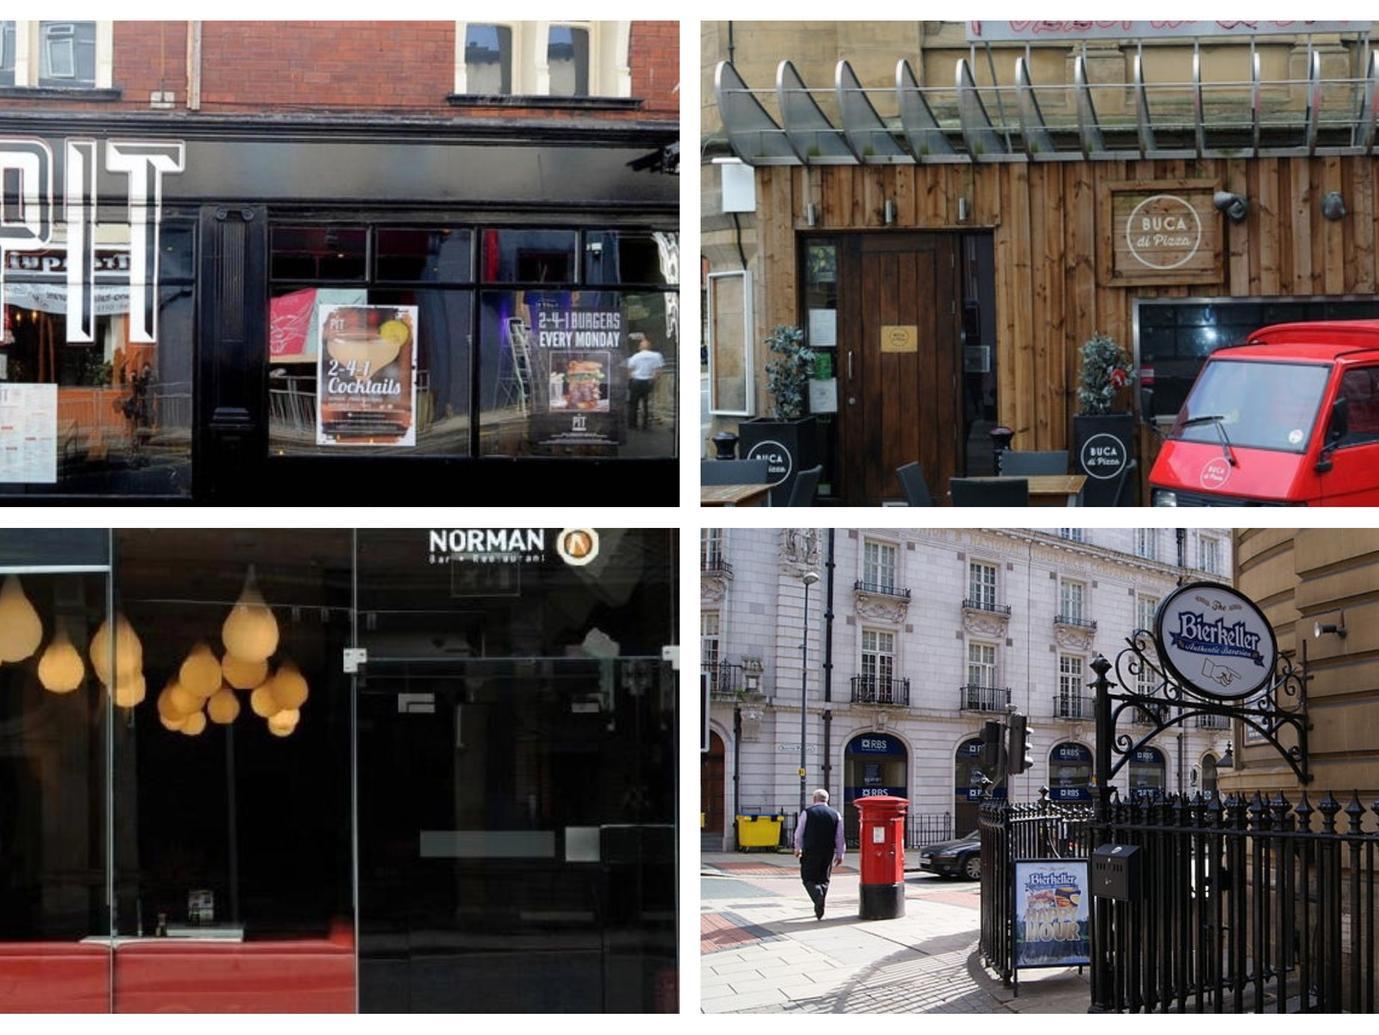 Leeds restaurants and bars that closed in 2019.